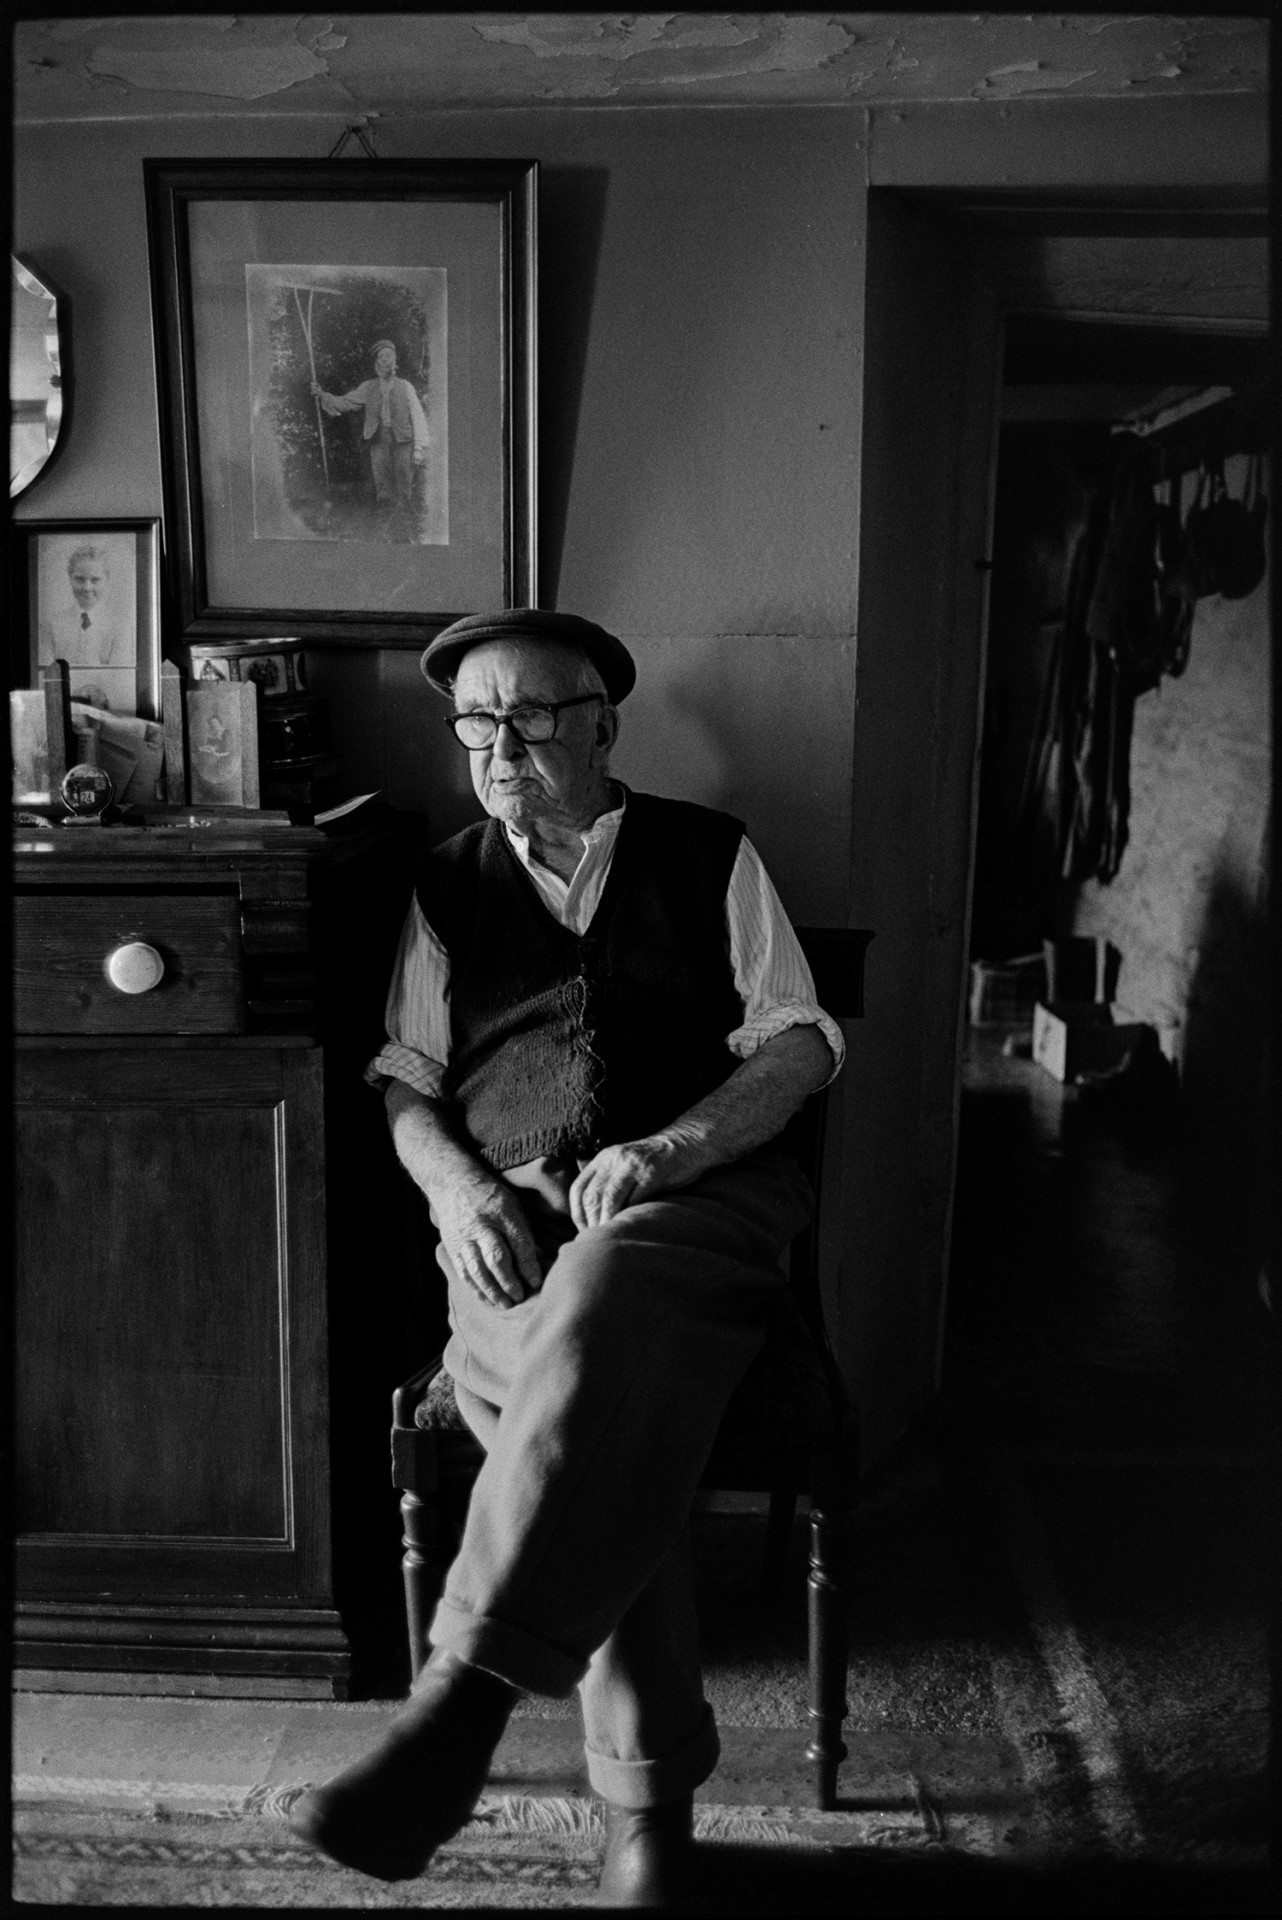 Elderly man seated, talking to doctor, beside cabinet which he made, mirror and photographs.
[Jack Buckingham at Bottreaux Mill, Molland, sitting by a wooden cabinet he had made, with photographs displayed on it. A large family photograph hangs on the wall behind him.]